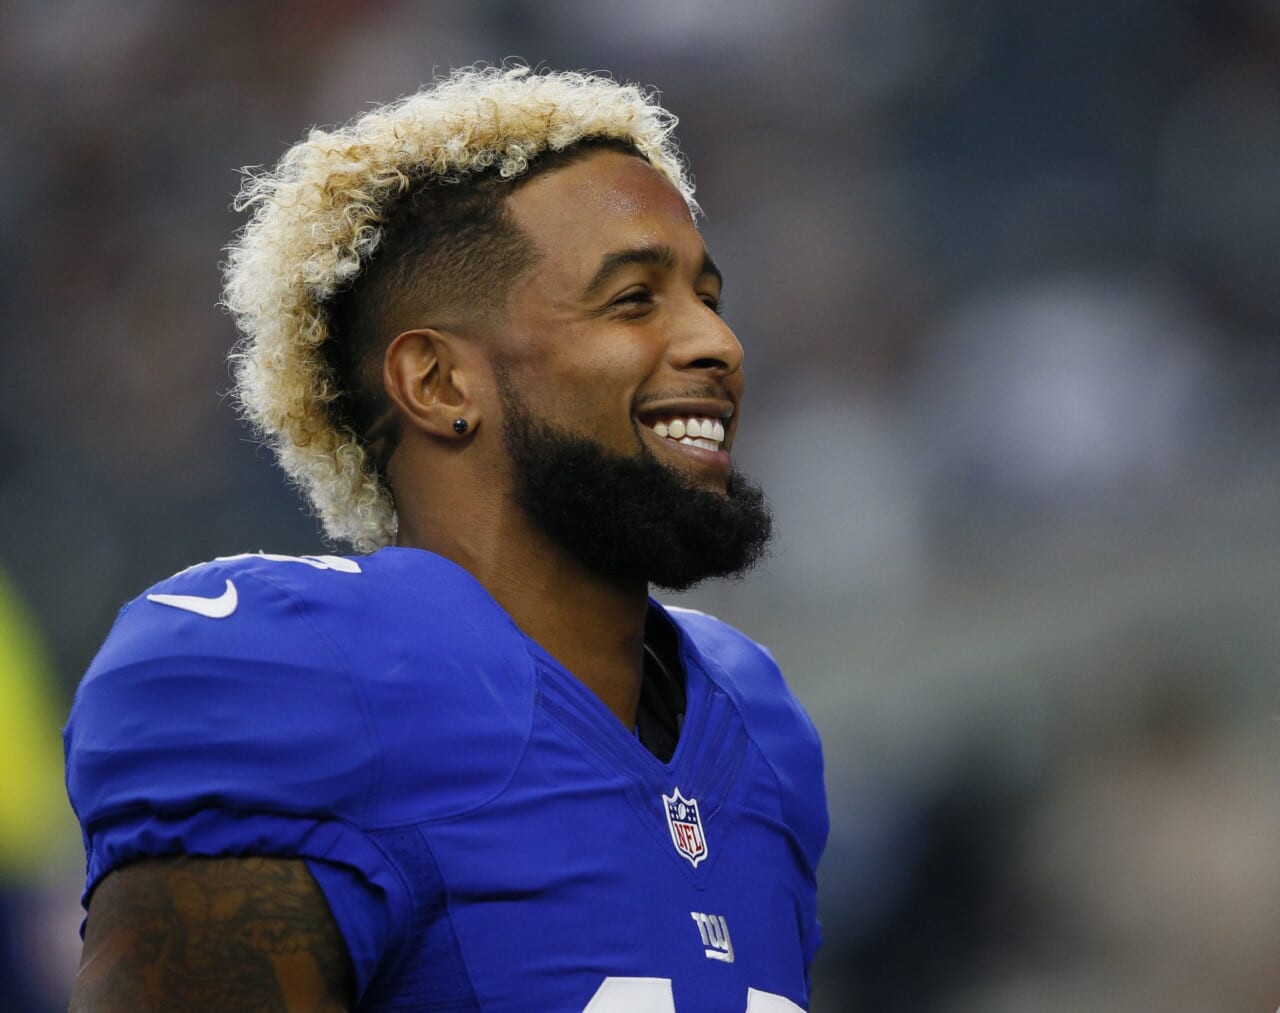 Why the New York Giants should be aggressive in attempting to sign Odell Beckham Jr.